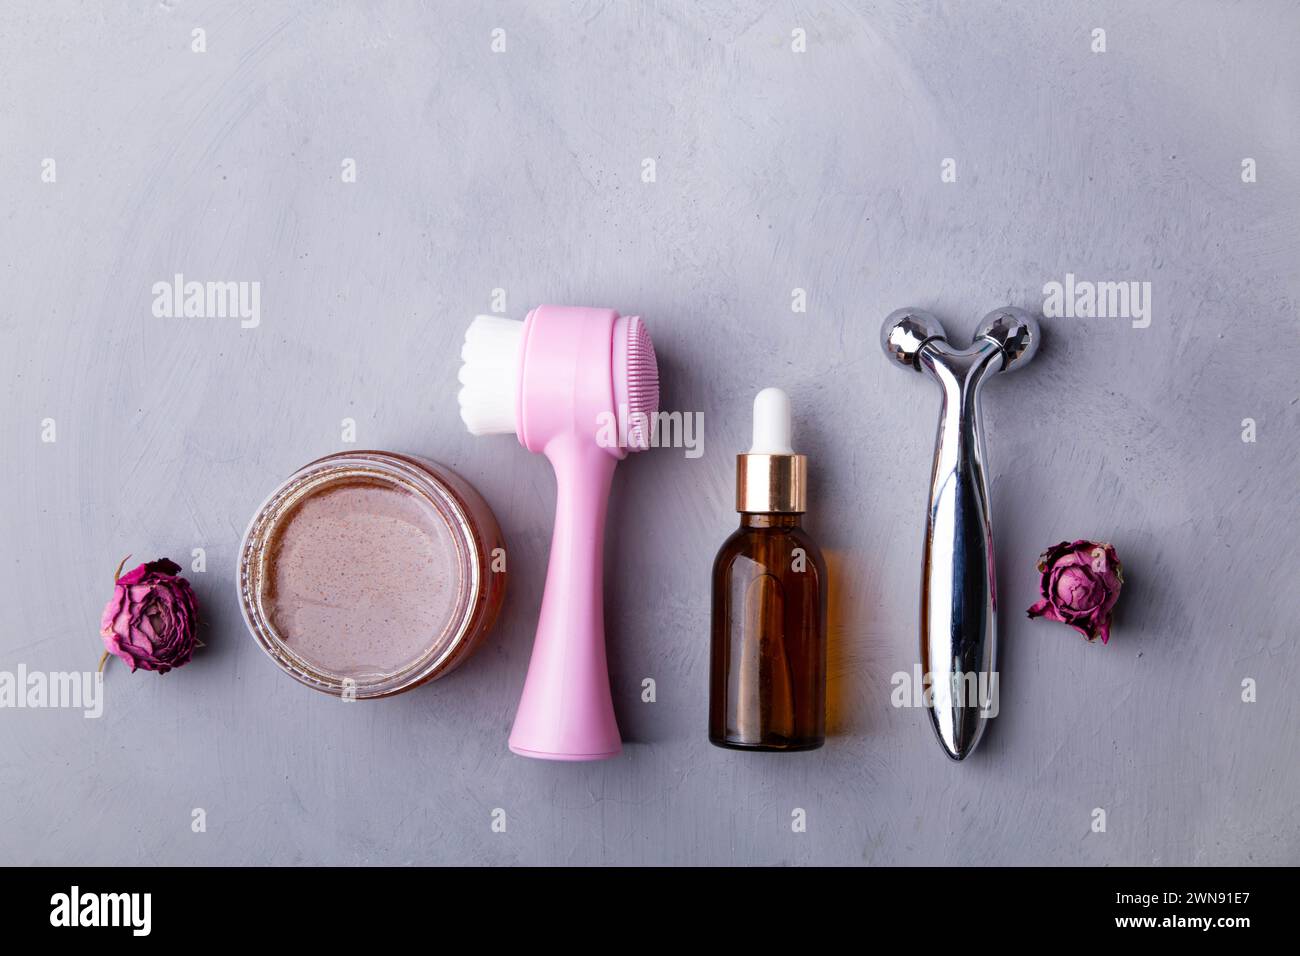 Feminine beauty products. Spa and self-care concept. Face brush, hyaluronic acid bottle, scrub, face massager. Stock Photo